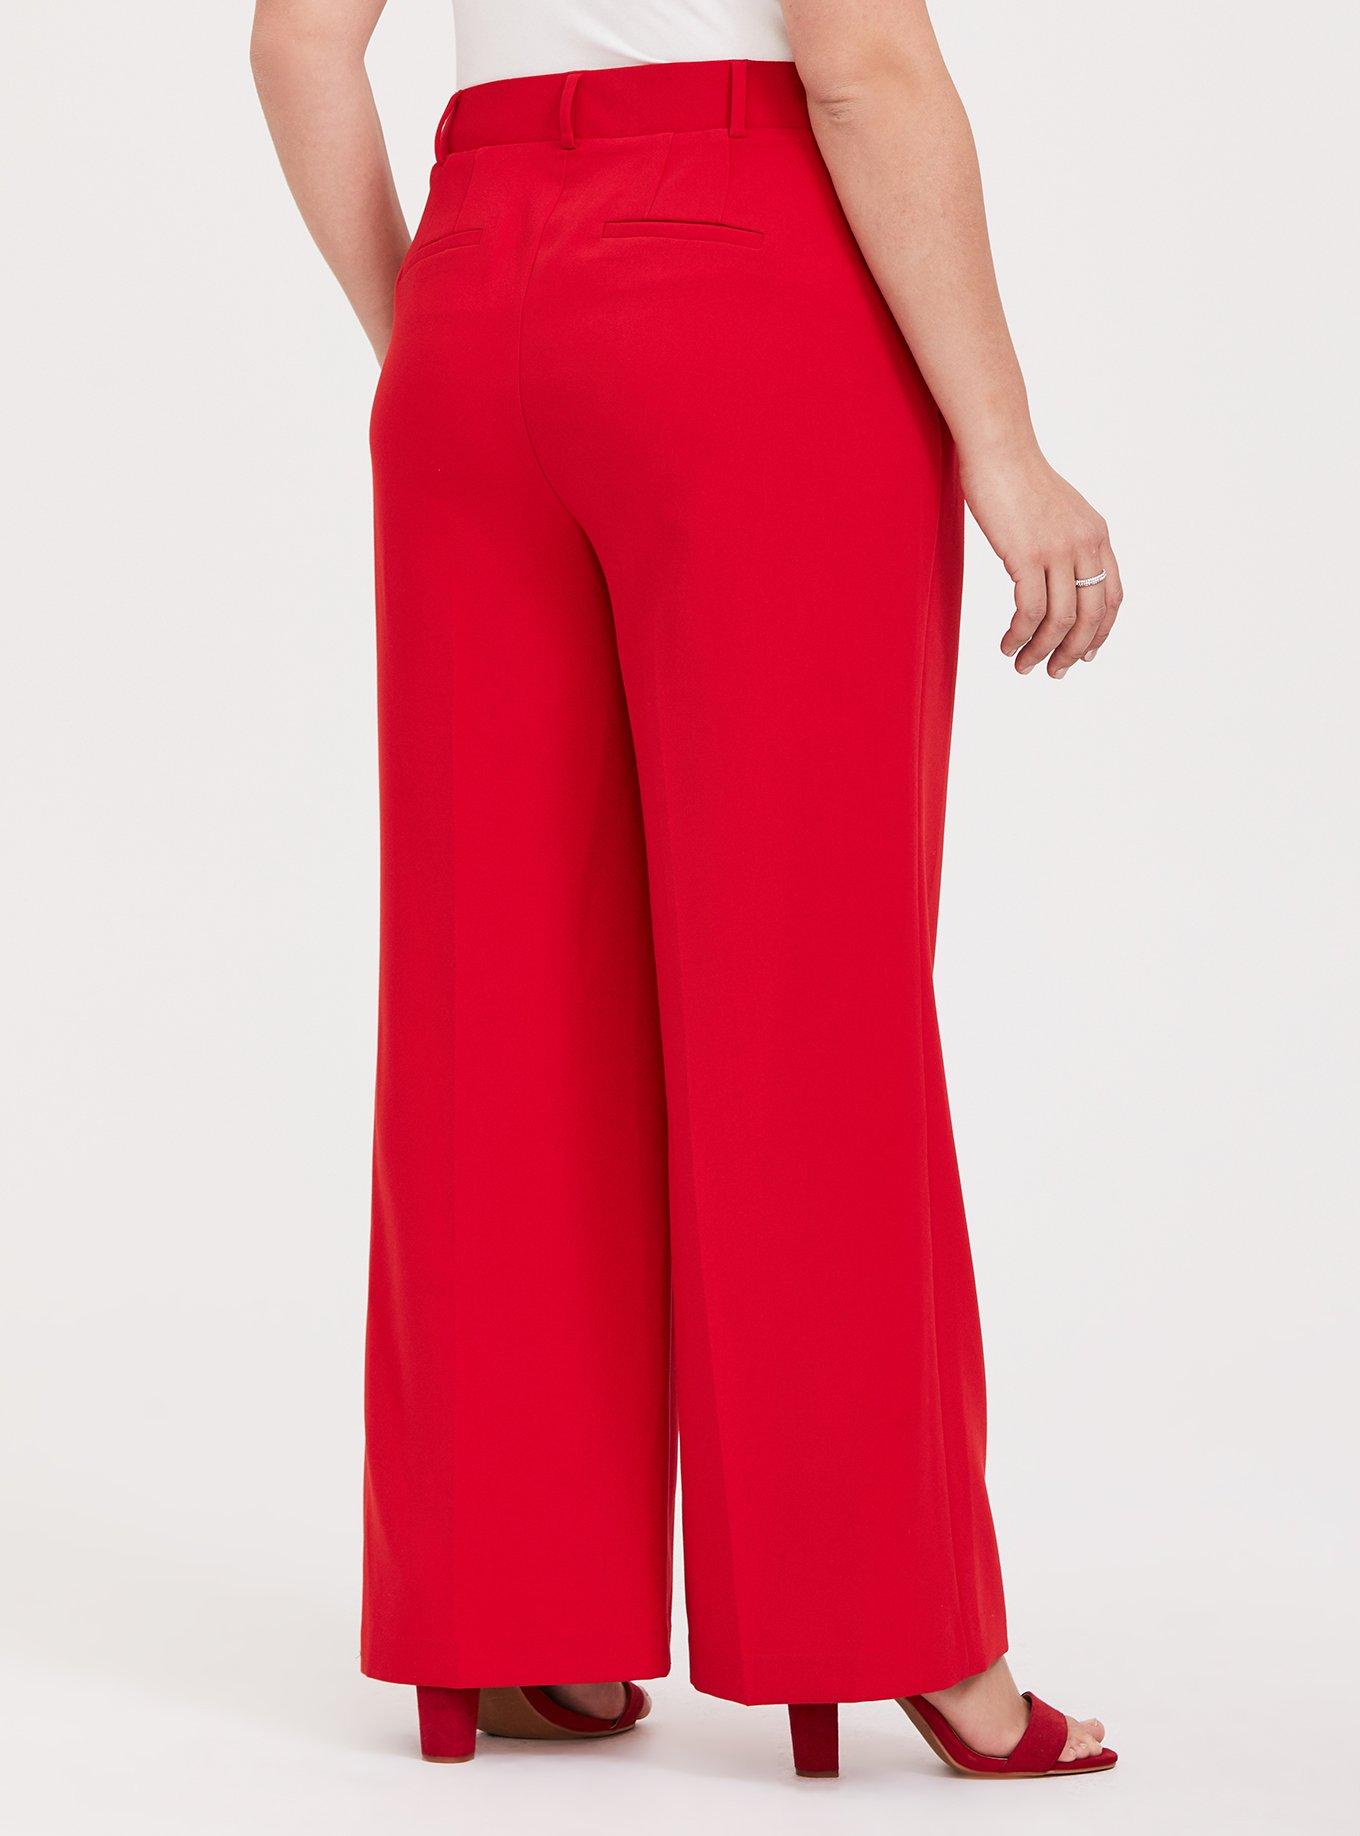 Plus Size - Red Structured Woven Wide Leg Pant - Torrid